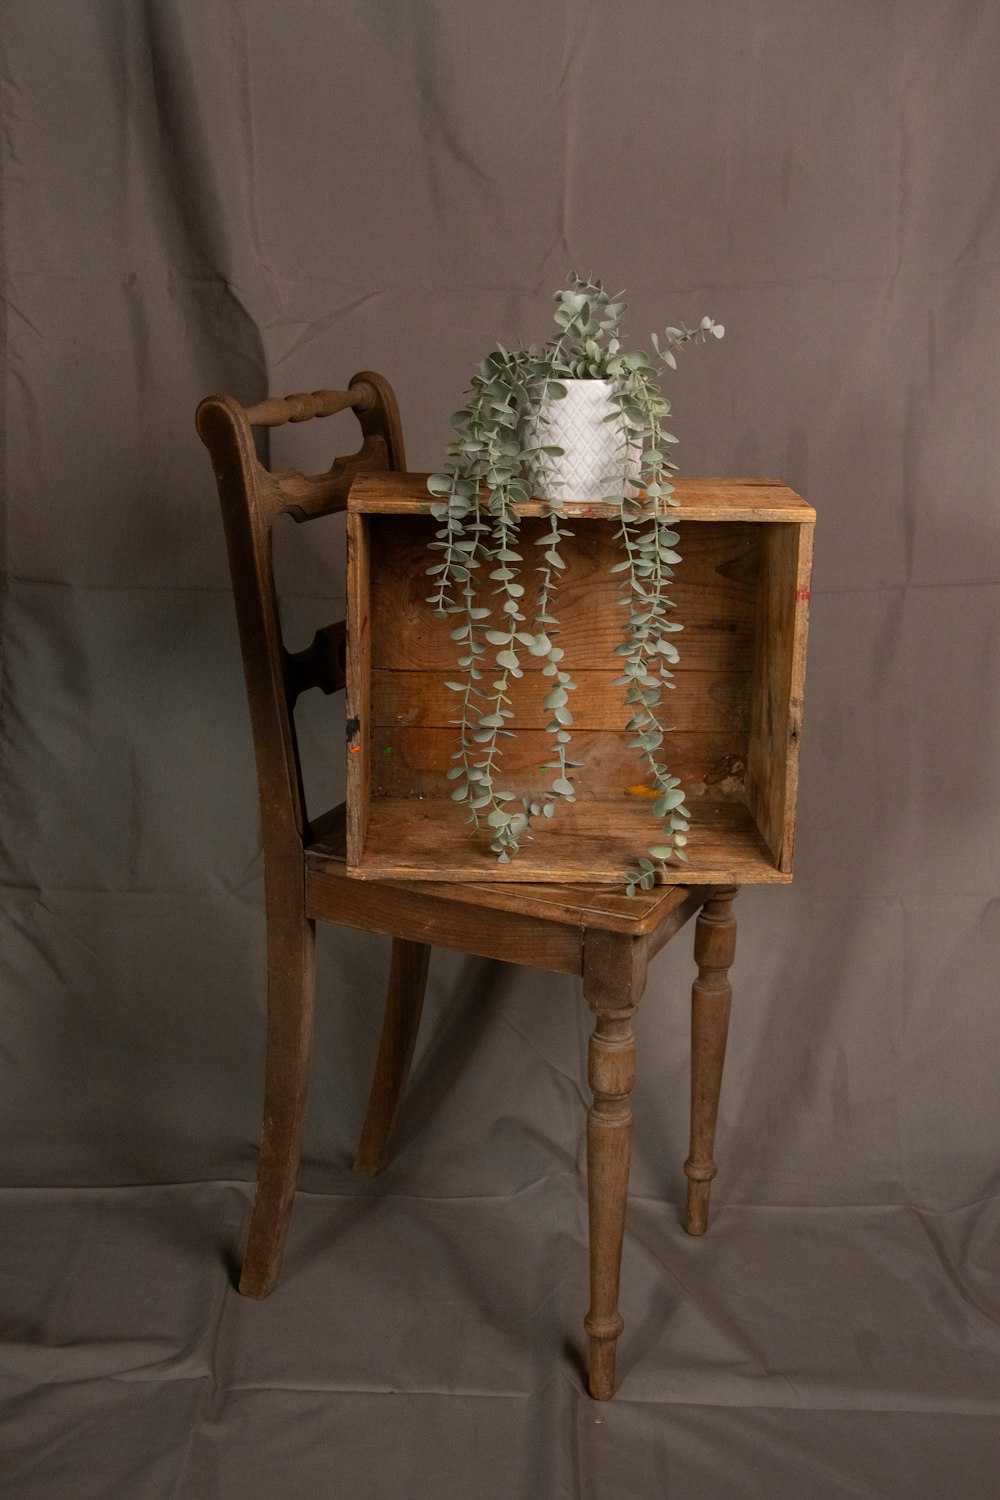 a wooden chair with a vase of flowers on top